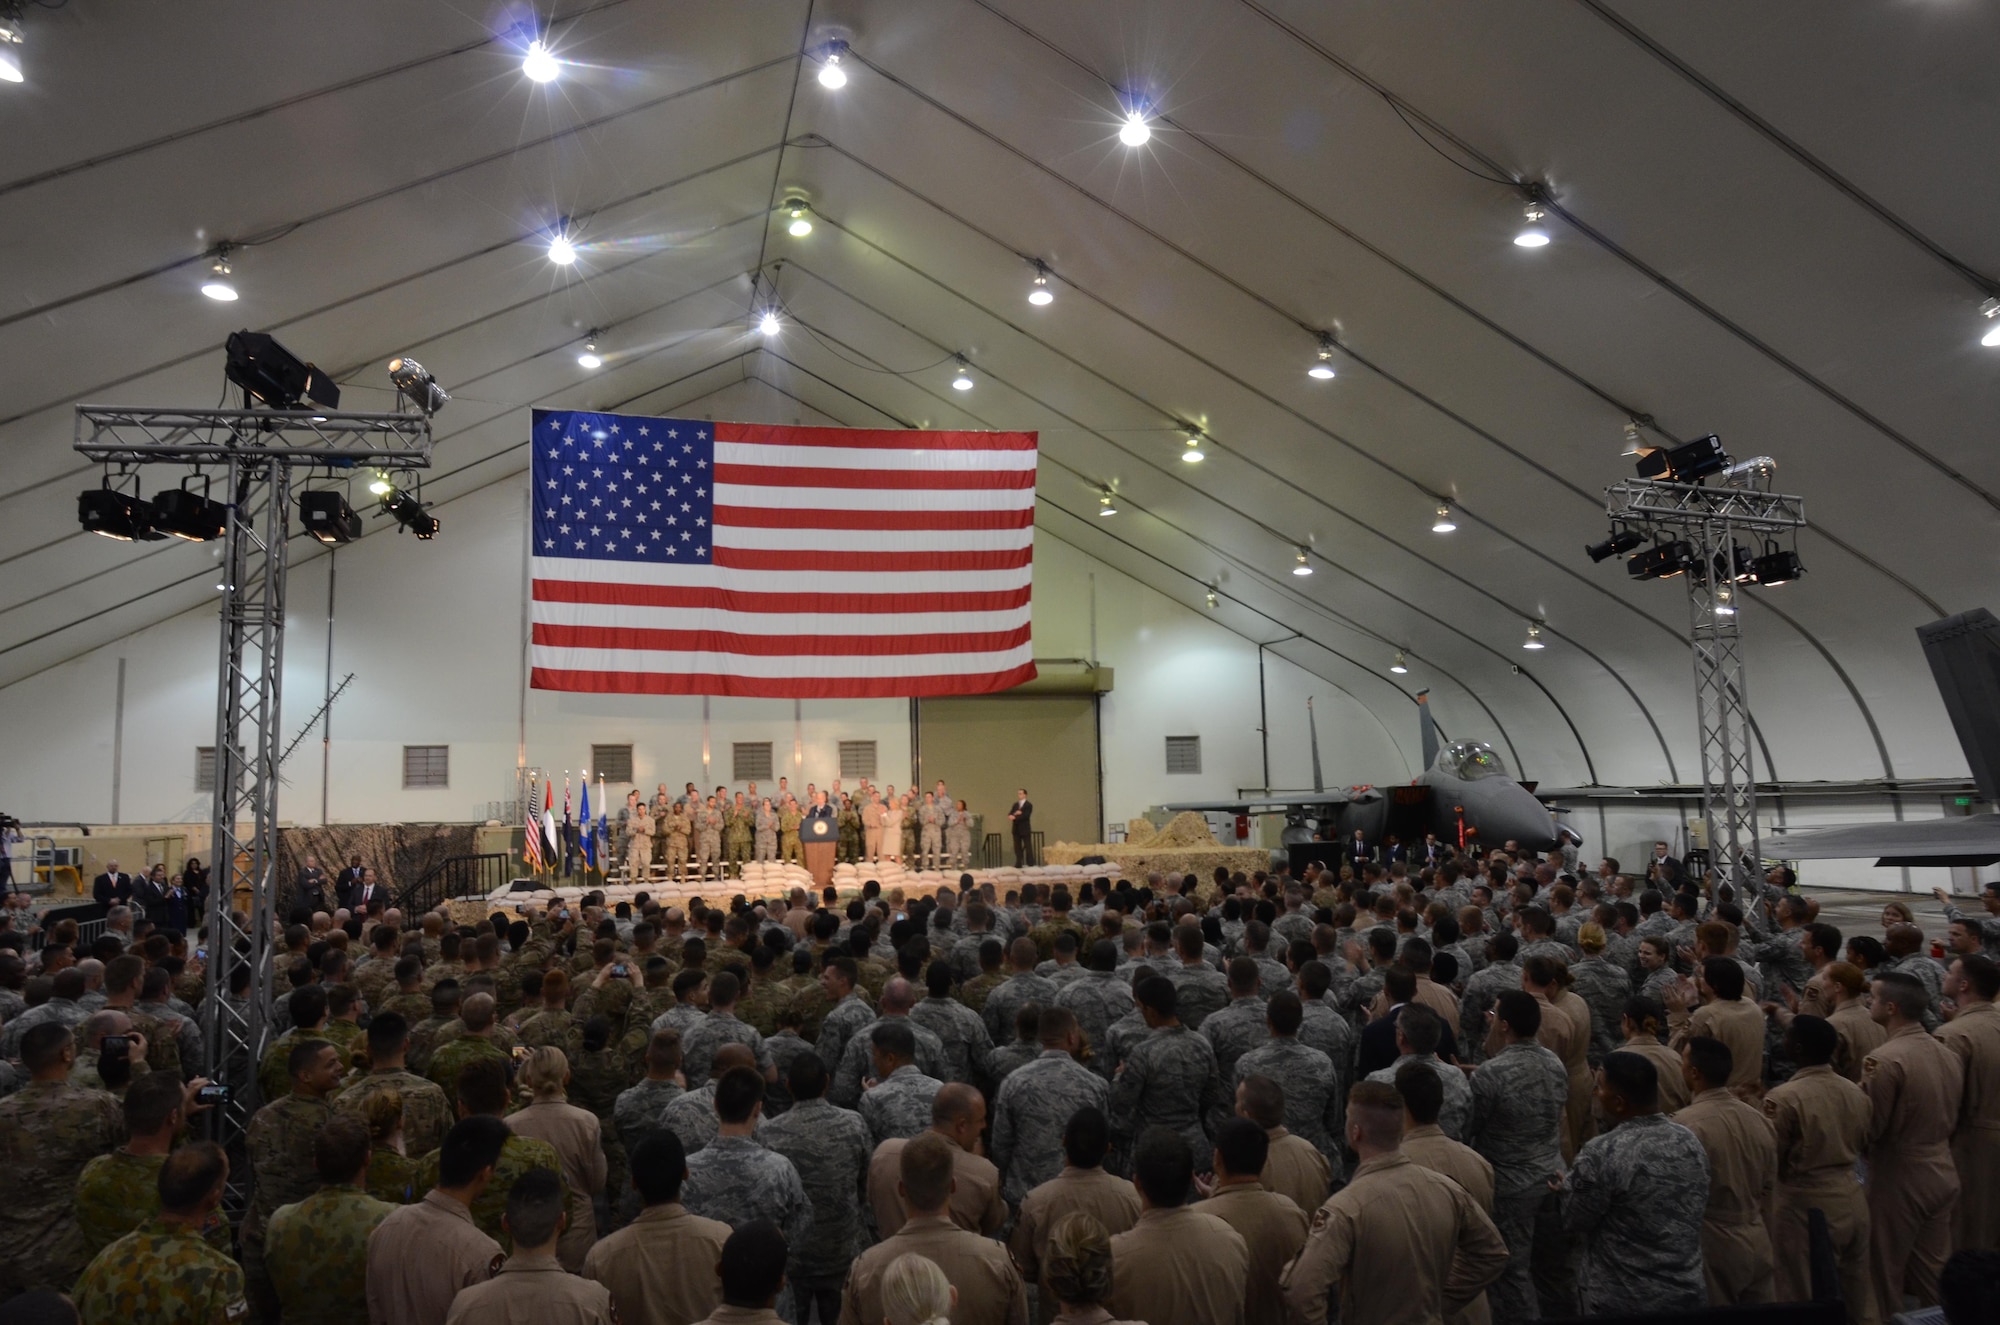 Vice President Joe Biden speaks to a crowd of more than 1,000 service members, civilians and coalition partners from five nations at an undisclosed location in Southwest Asia, Mar. 7, 2016. Biden delivered a message of thanks and appreciation for military members and their families supporting Operation Inherent Resolve. (U.S. Air Force photo by Tech. Sgt. Frank Miller/Released)